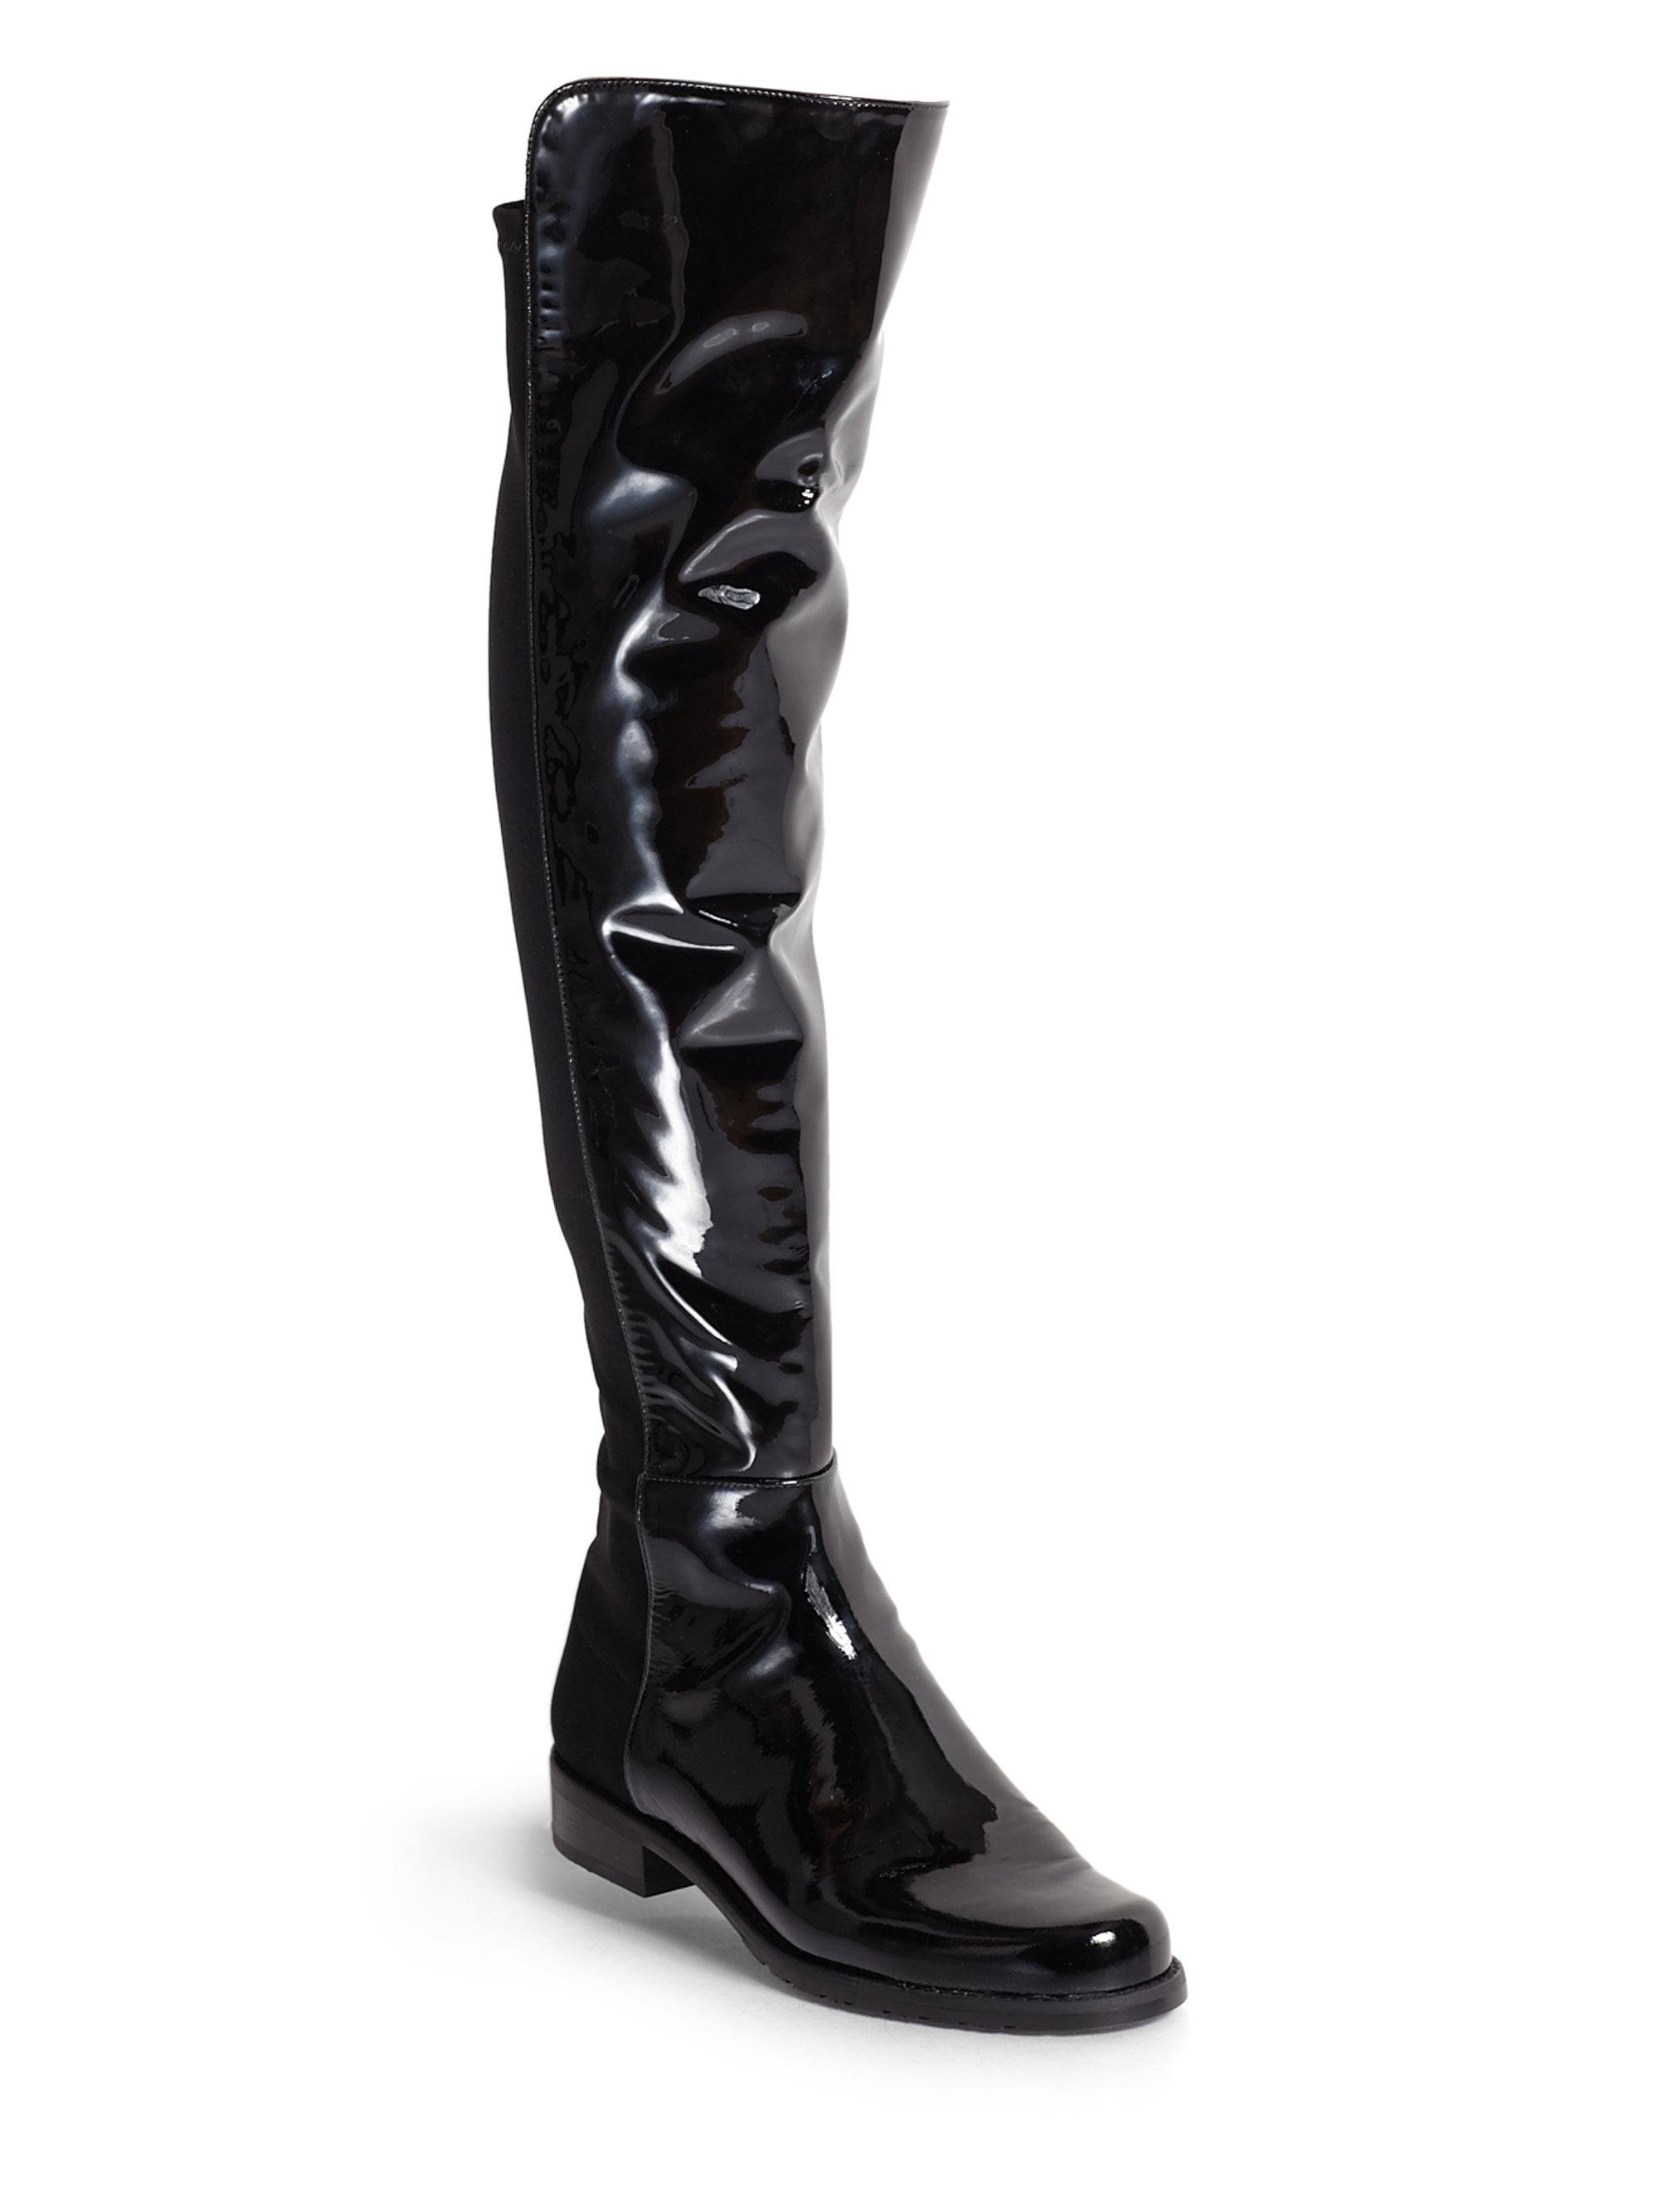 Lyst - Stuart Weitzman 5050 Stretch Patent Leather Over-the-knee Boots ...